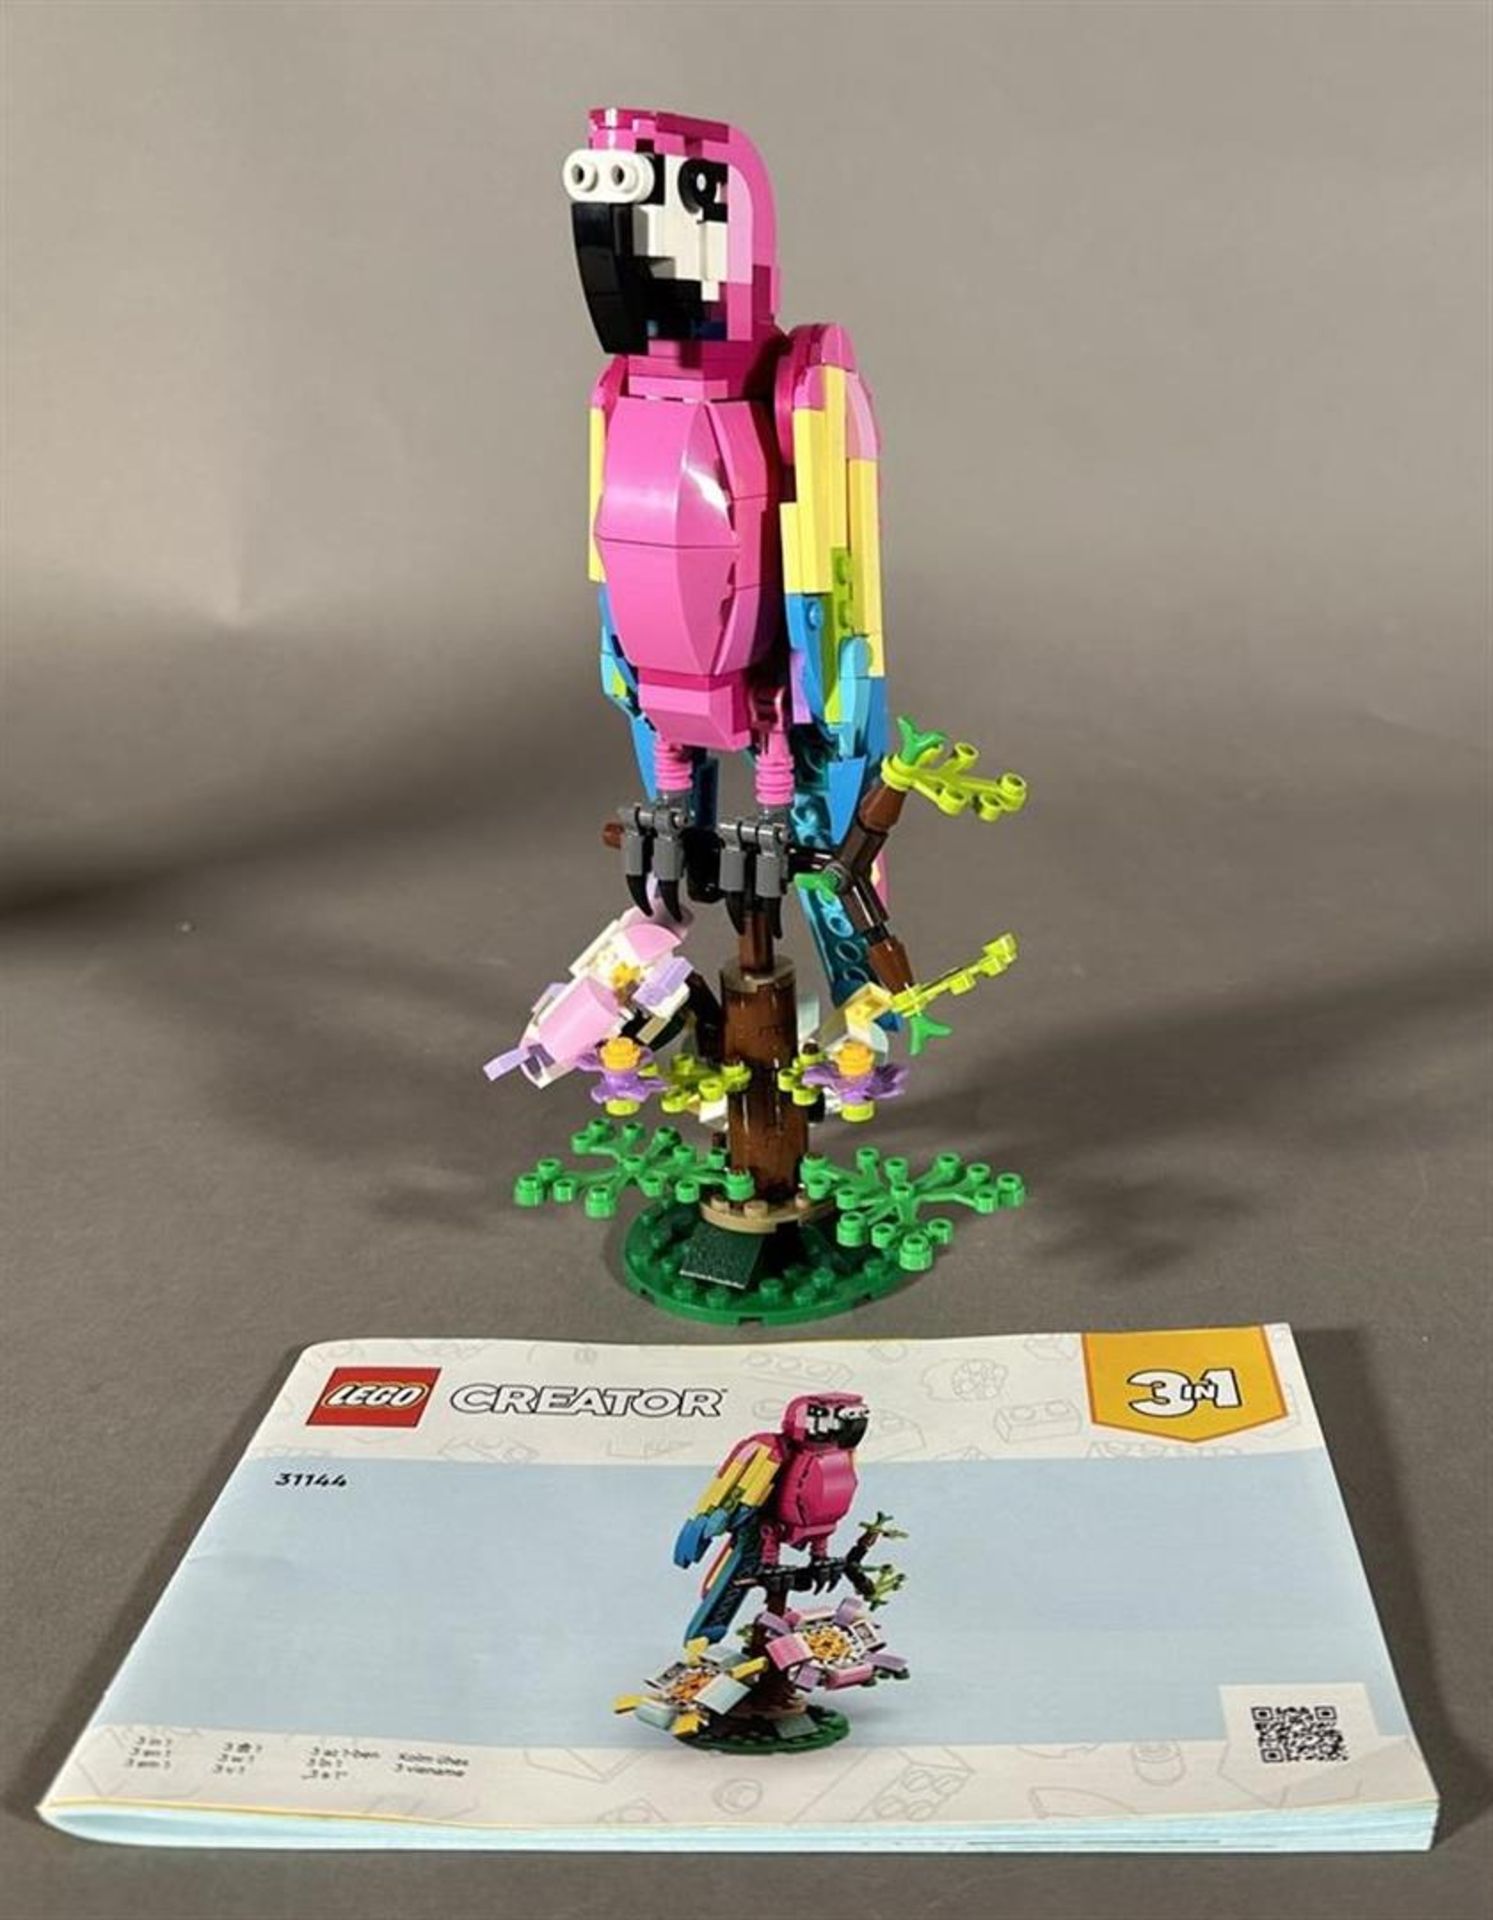 Lego creator 'blue' exotic parrot 31136; Lego creator 'pink' exotic parrot 6442319. (2x) - Image 3 of 4